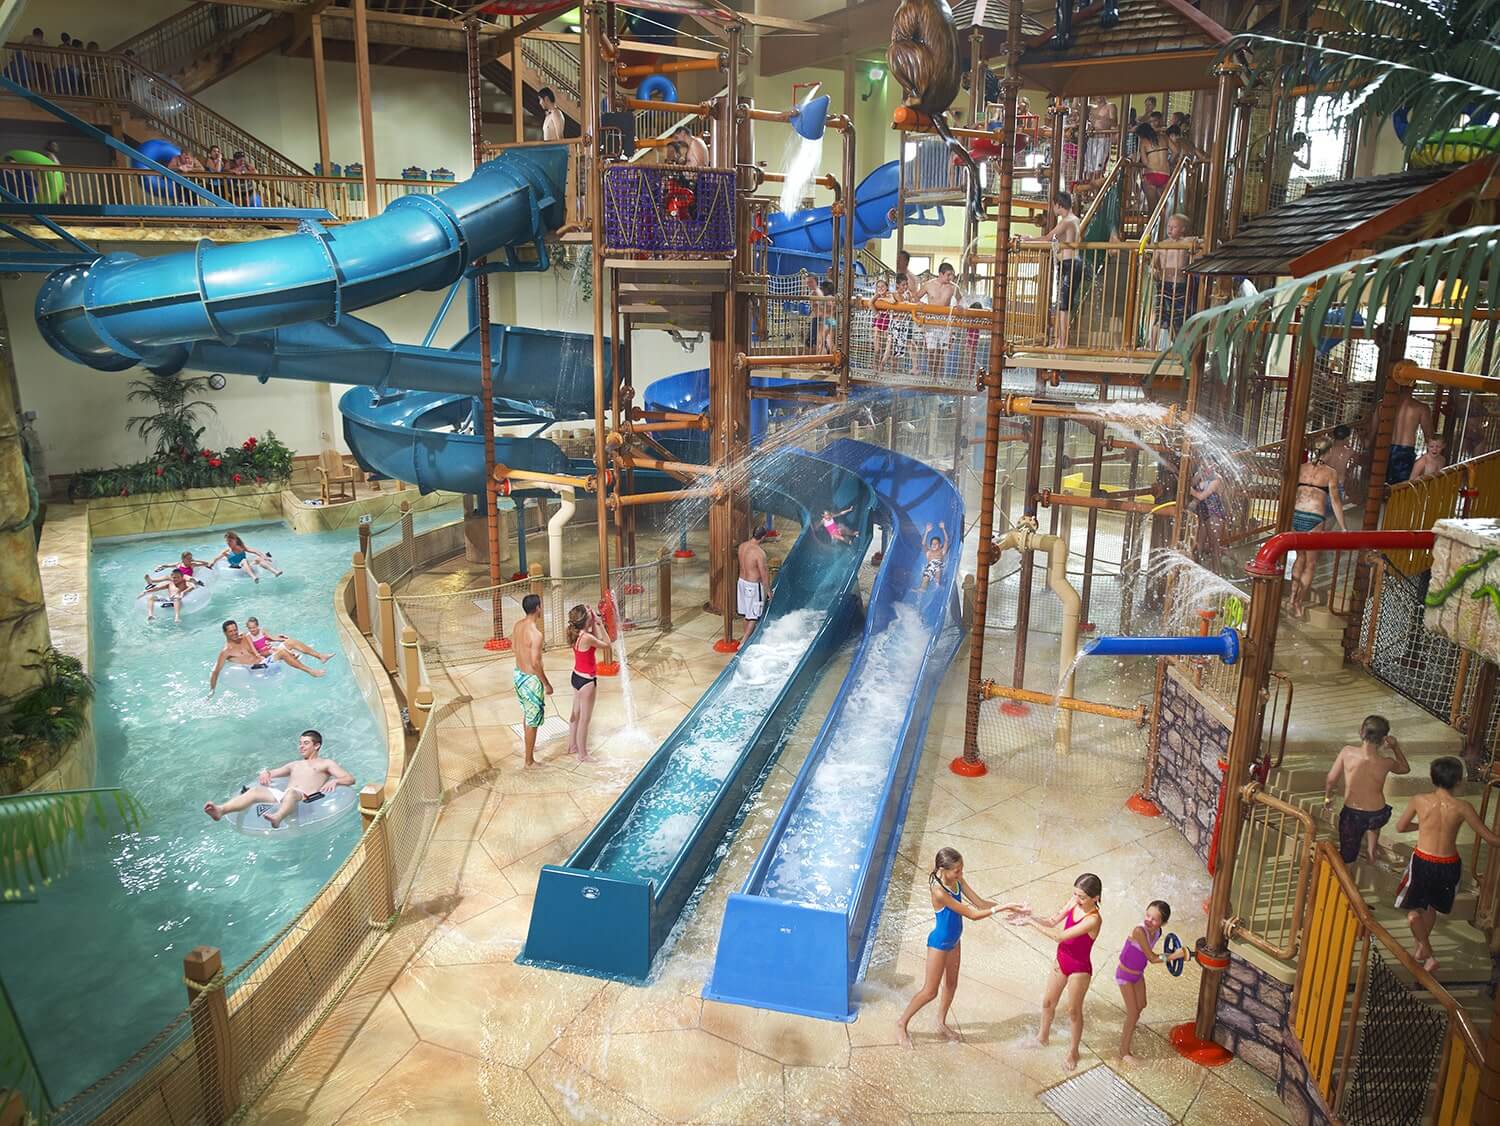 Chula Vista Named One Of The 10 Best Indoor Waterparks In The USA